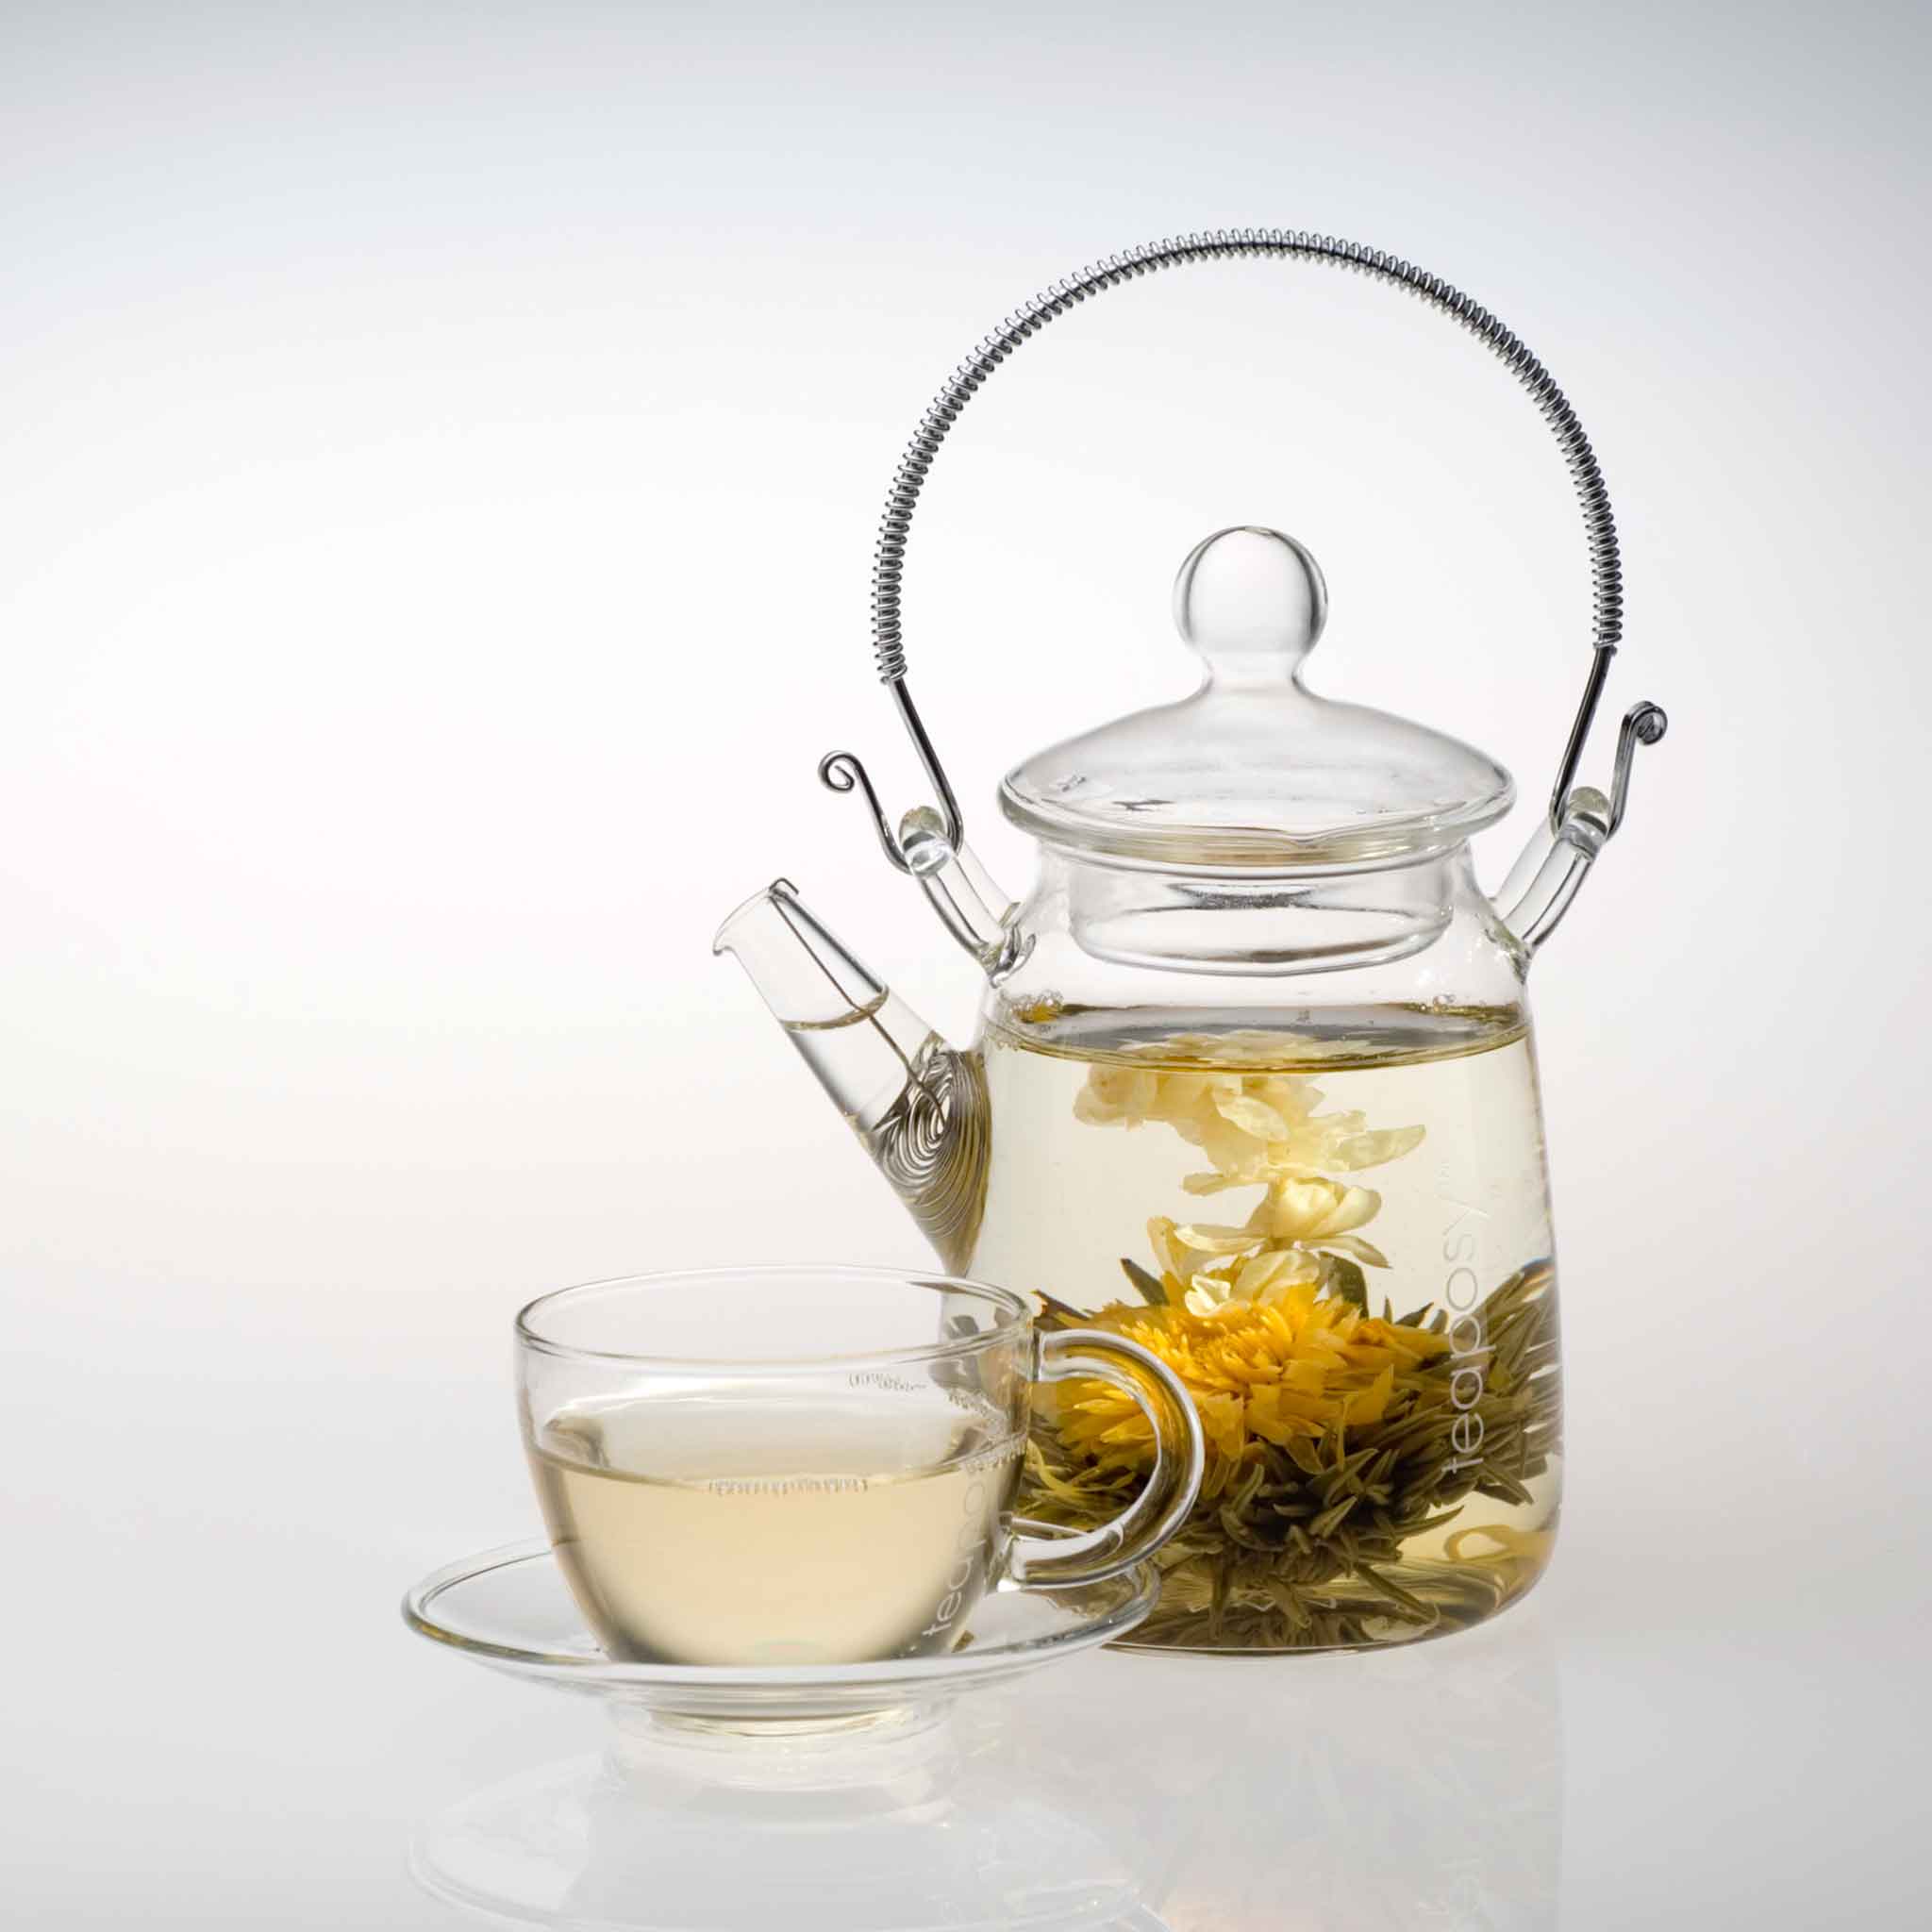 Glass Tea Infuser - Clear and Modern for All Type of Tea & Tea Flower 